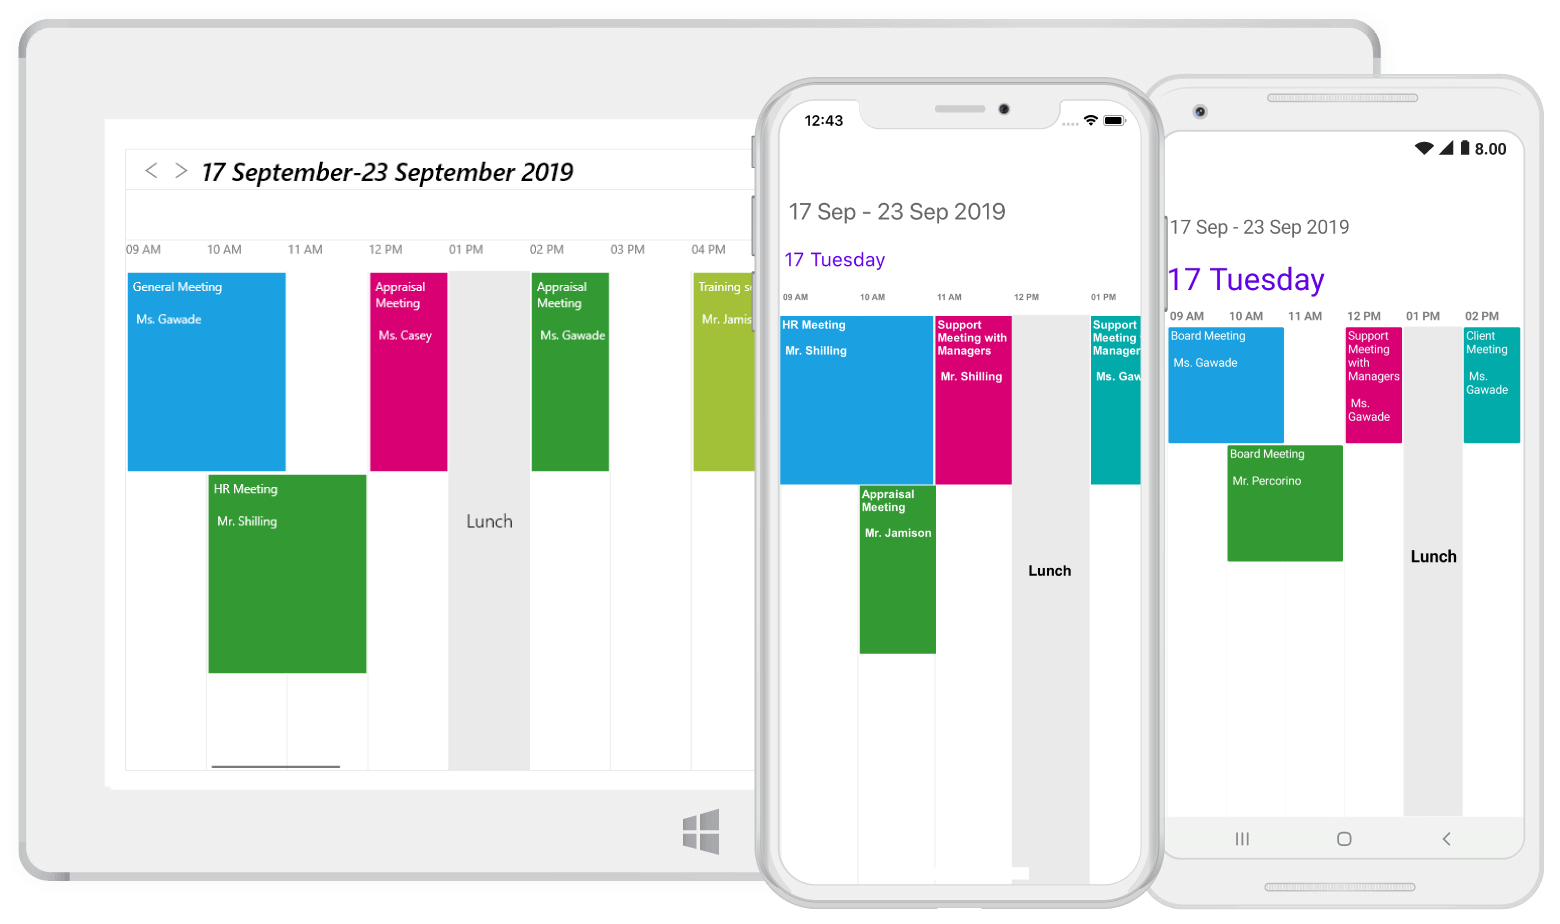 Timeline view in xamarin forms